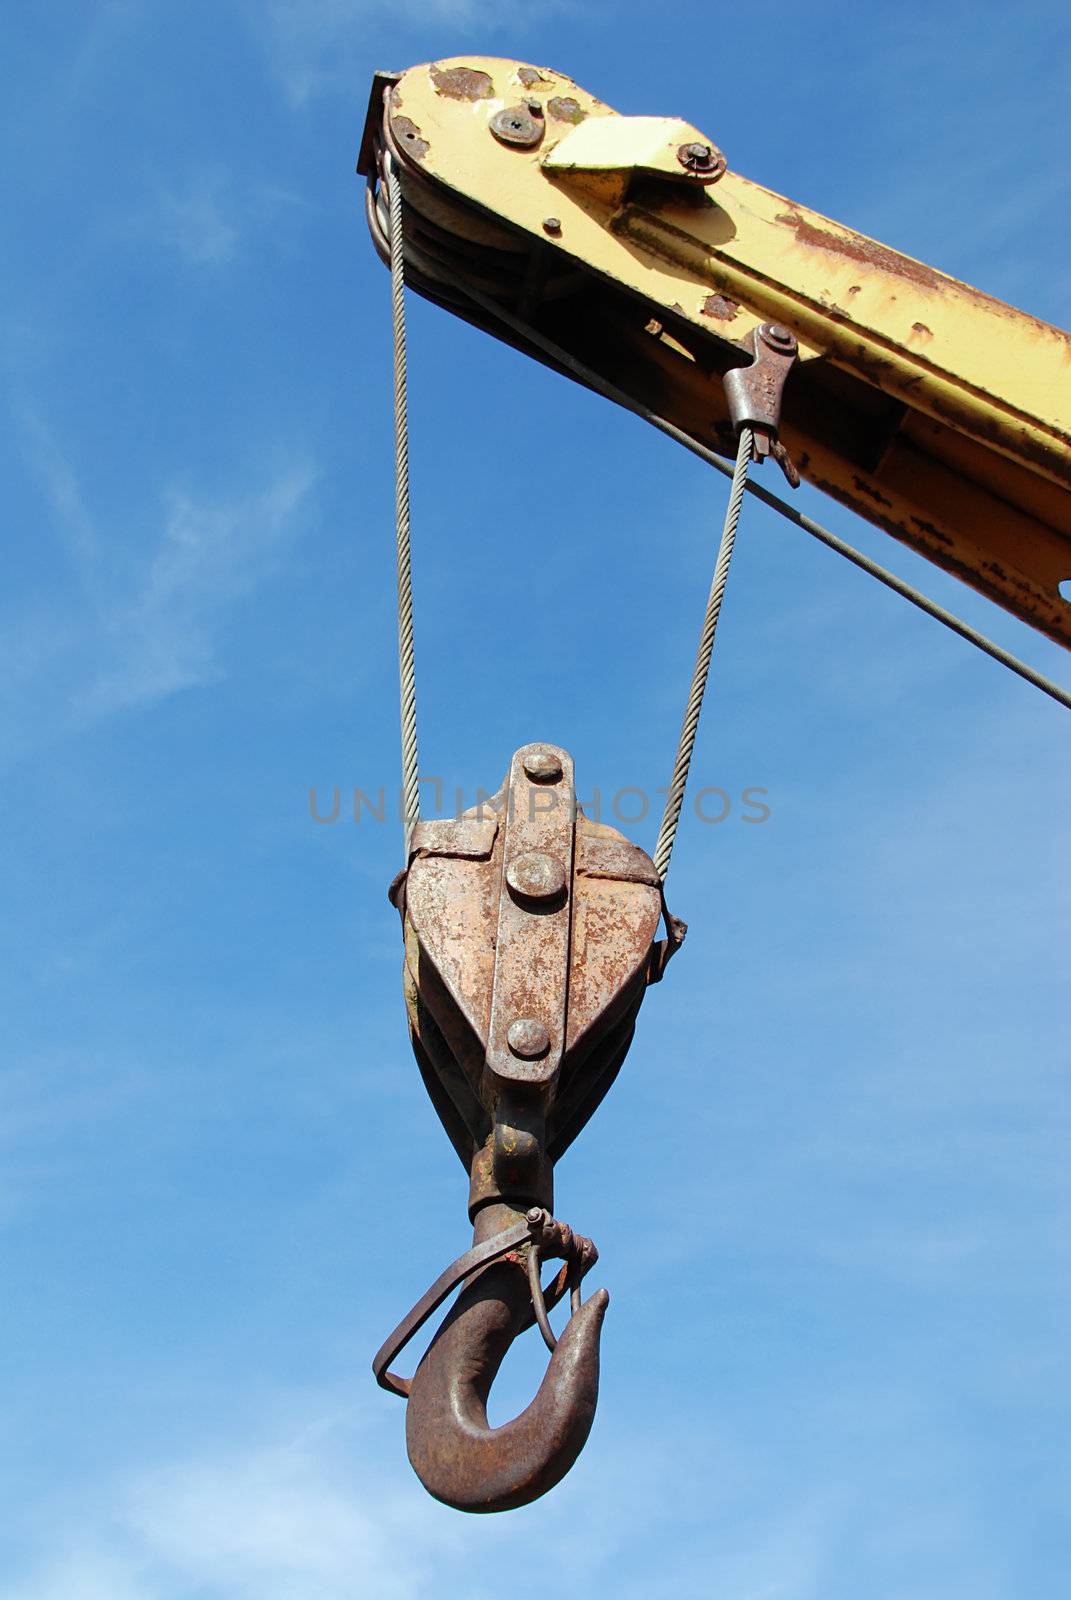 Hook of an old crane against a blue sky